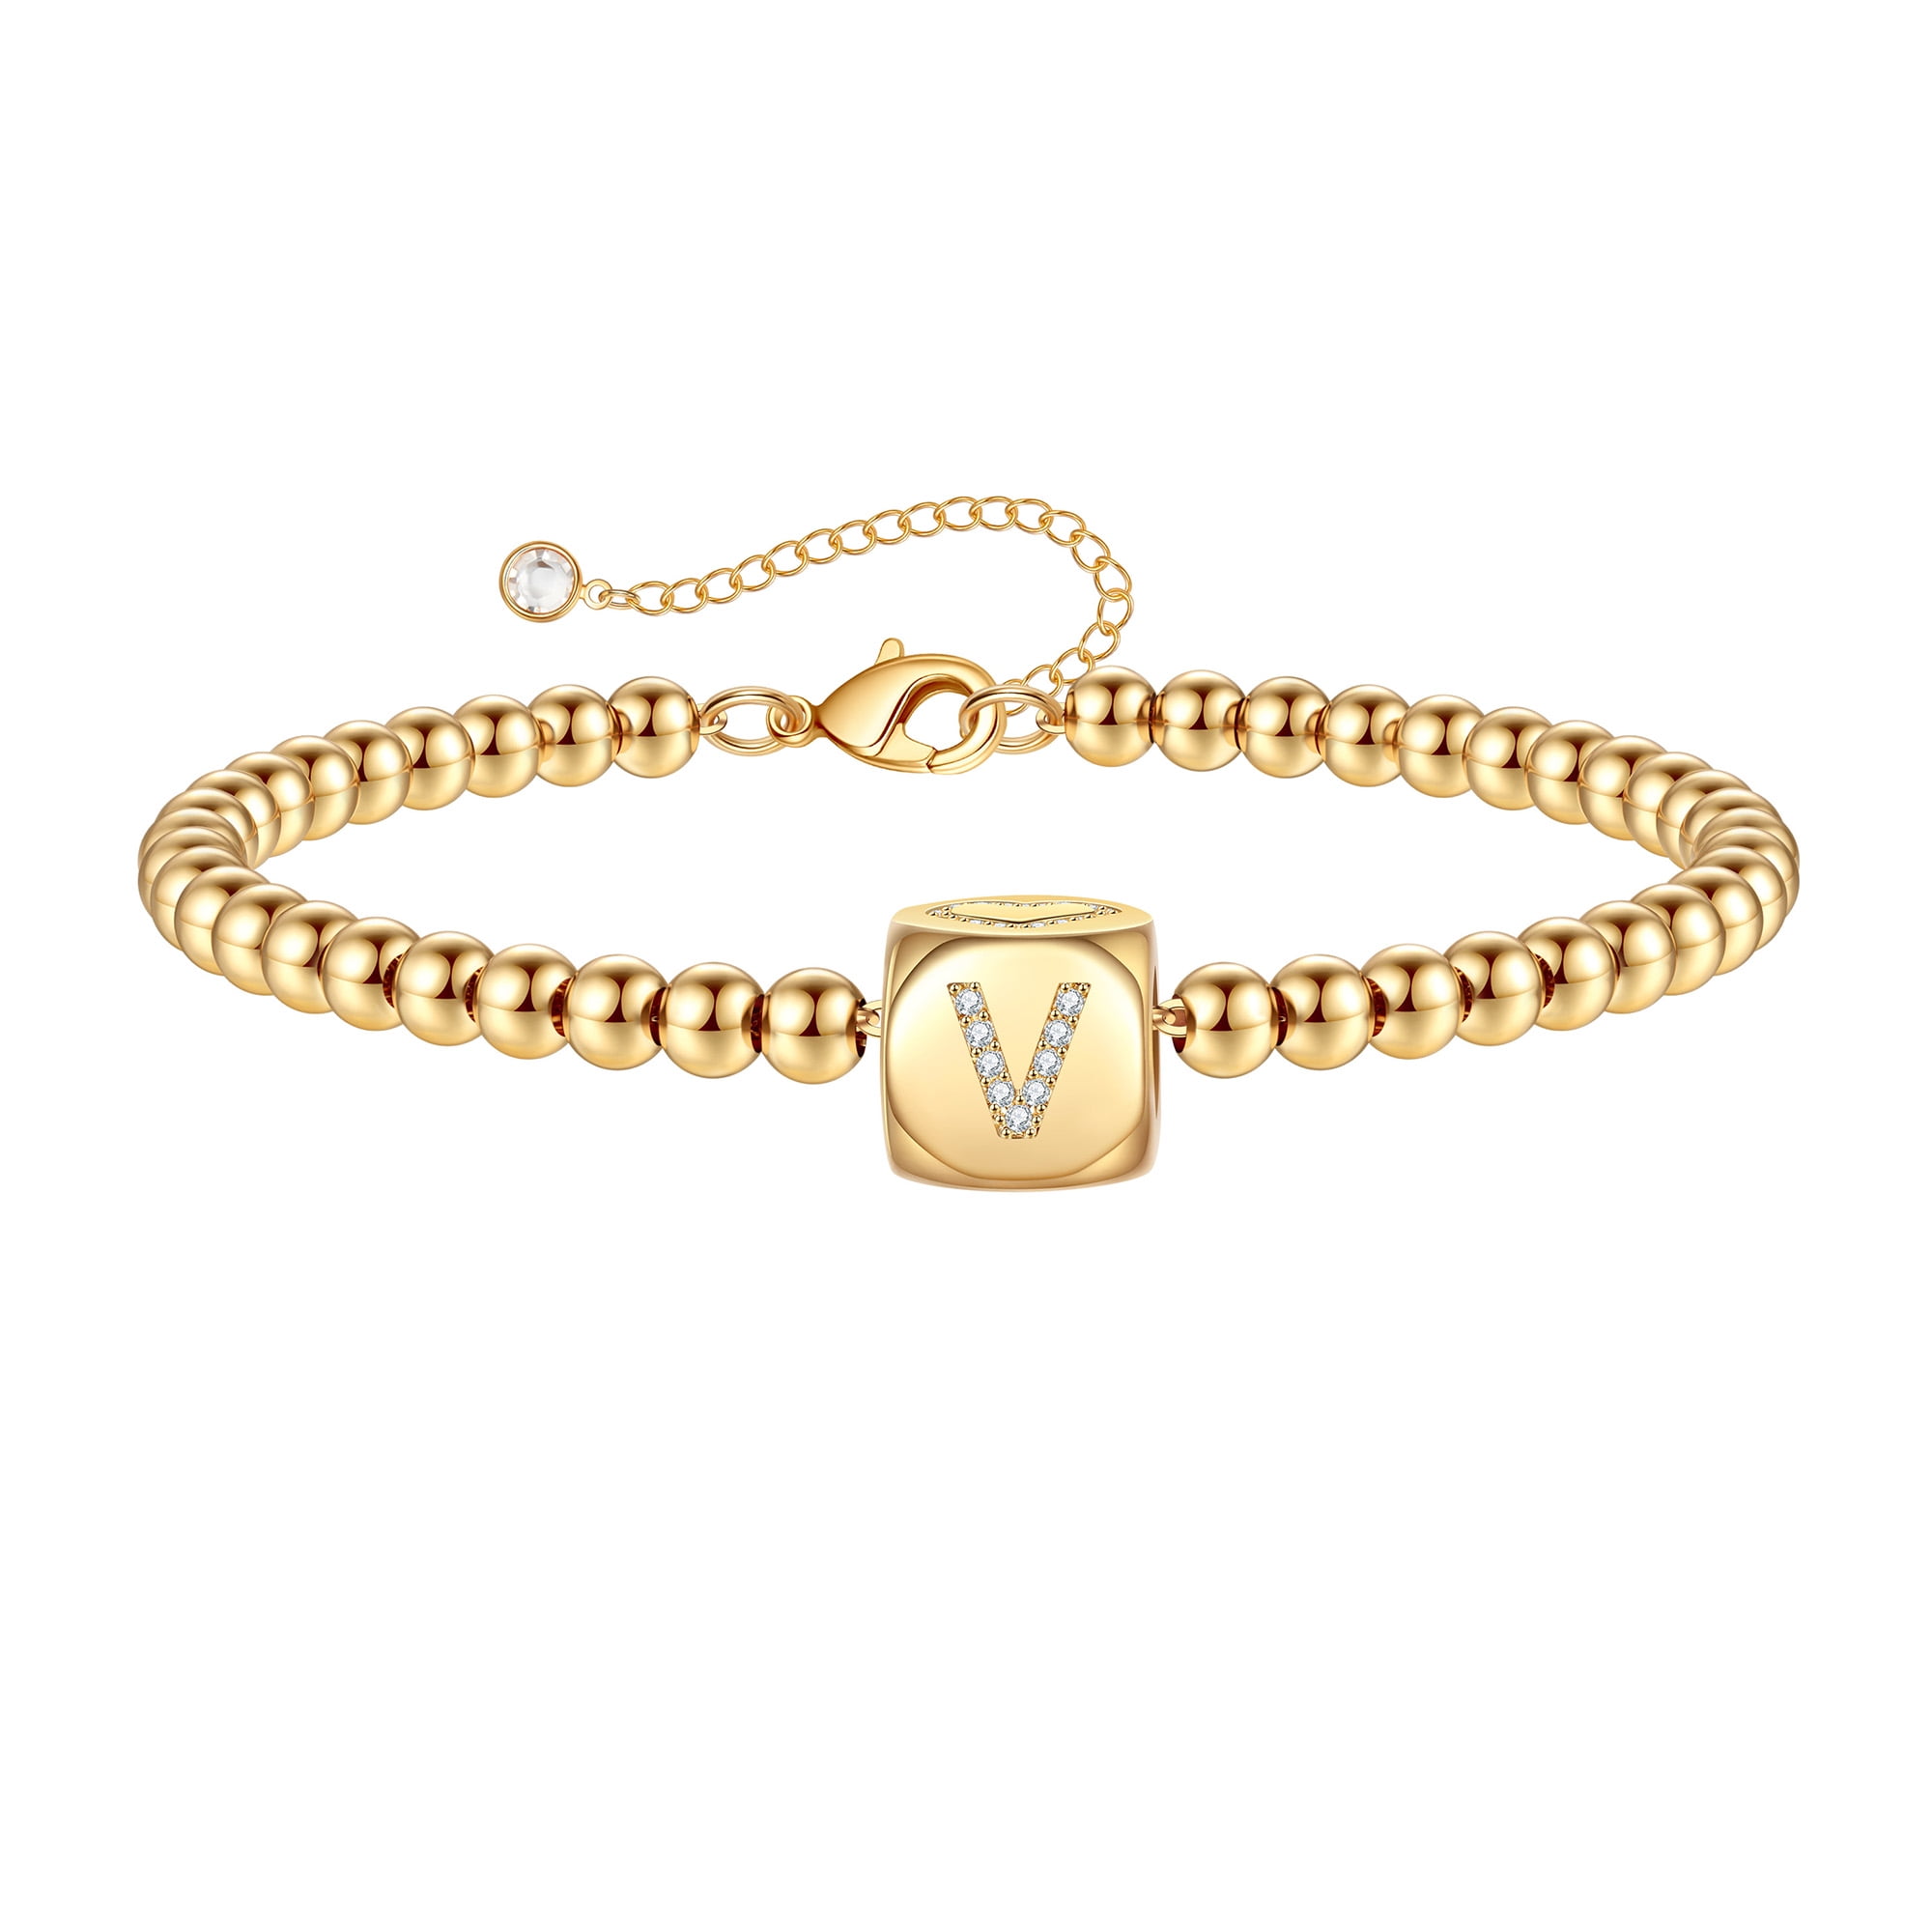 Monogram Bracelet Sterling Silver with or Without Gold Plate Center